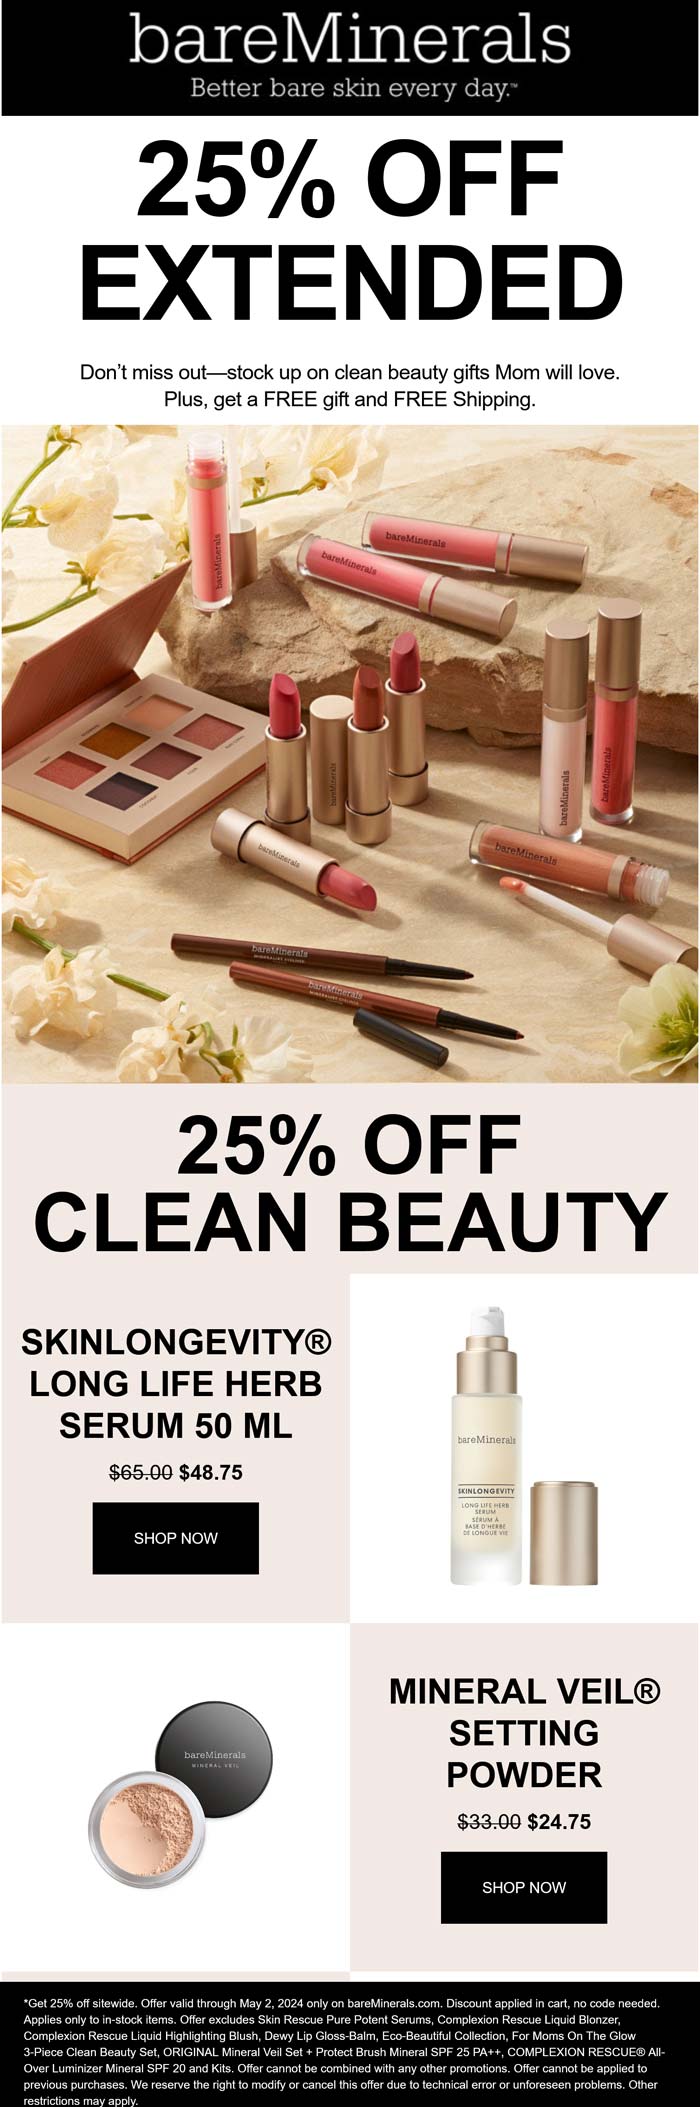 bareMinerals stores Coupon  25% off everything online today at bareMinerals #bareminerals 